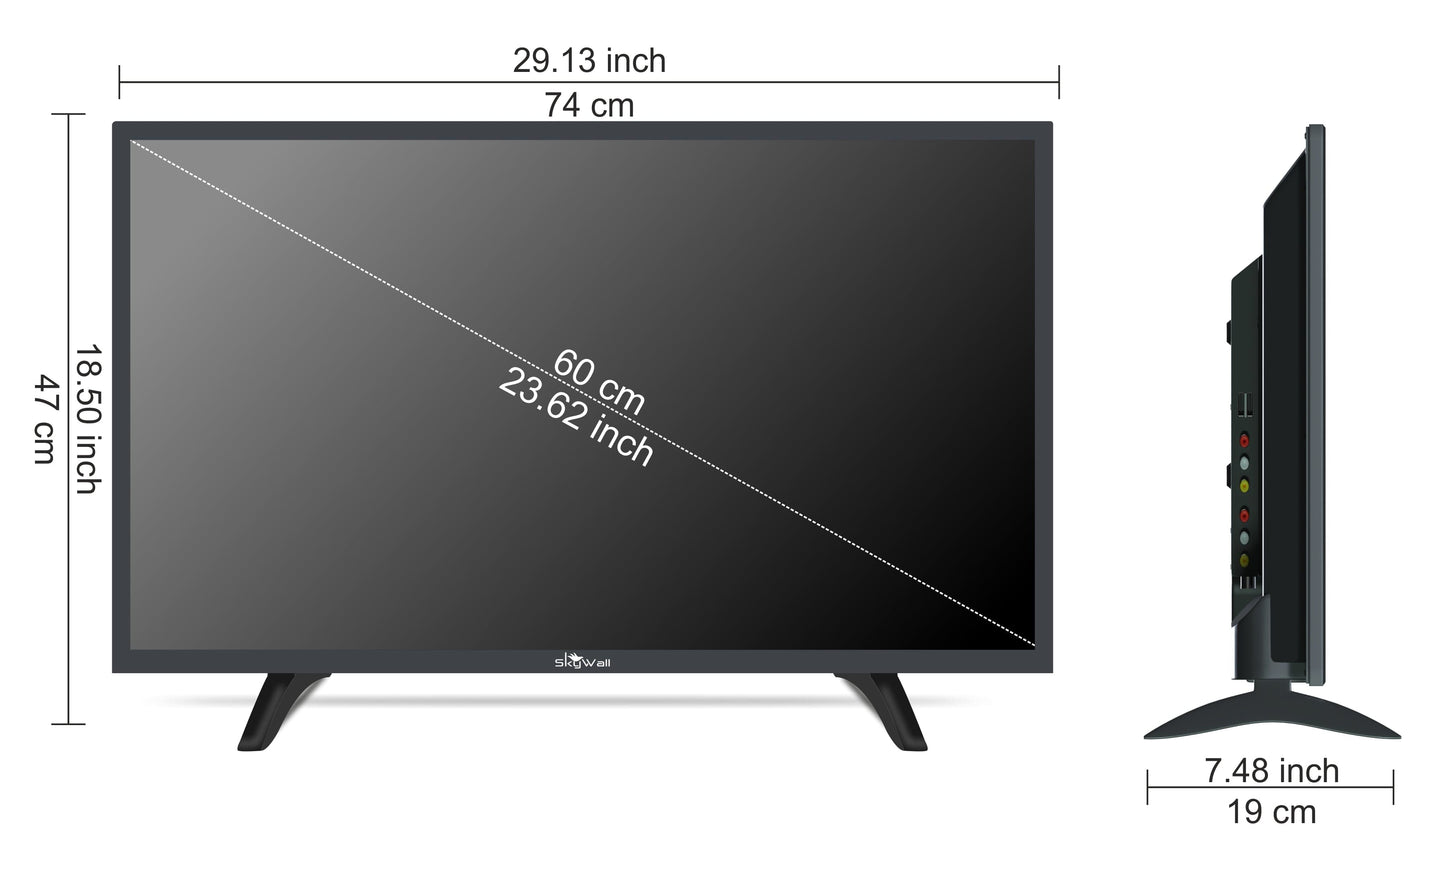 SkyWall 60.96 cm 24 inch HD Ready LED TV 24SWATV With A Grade Panel slim bezels